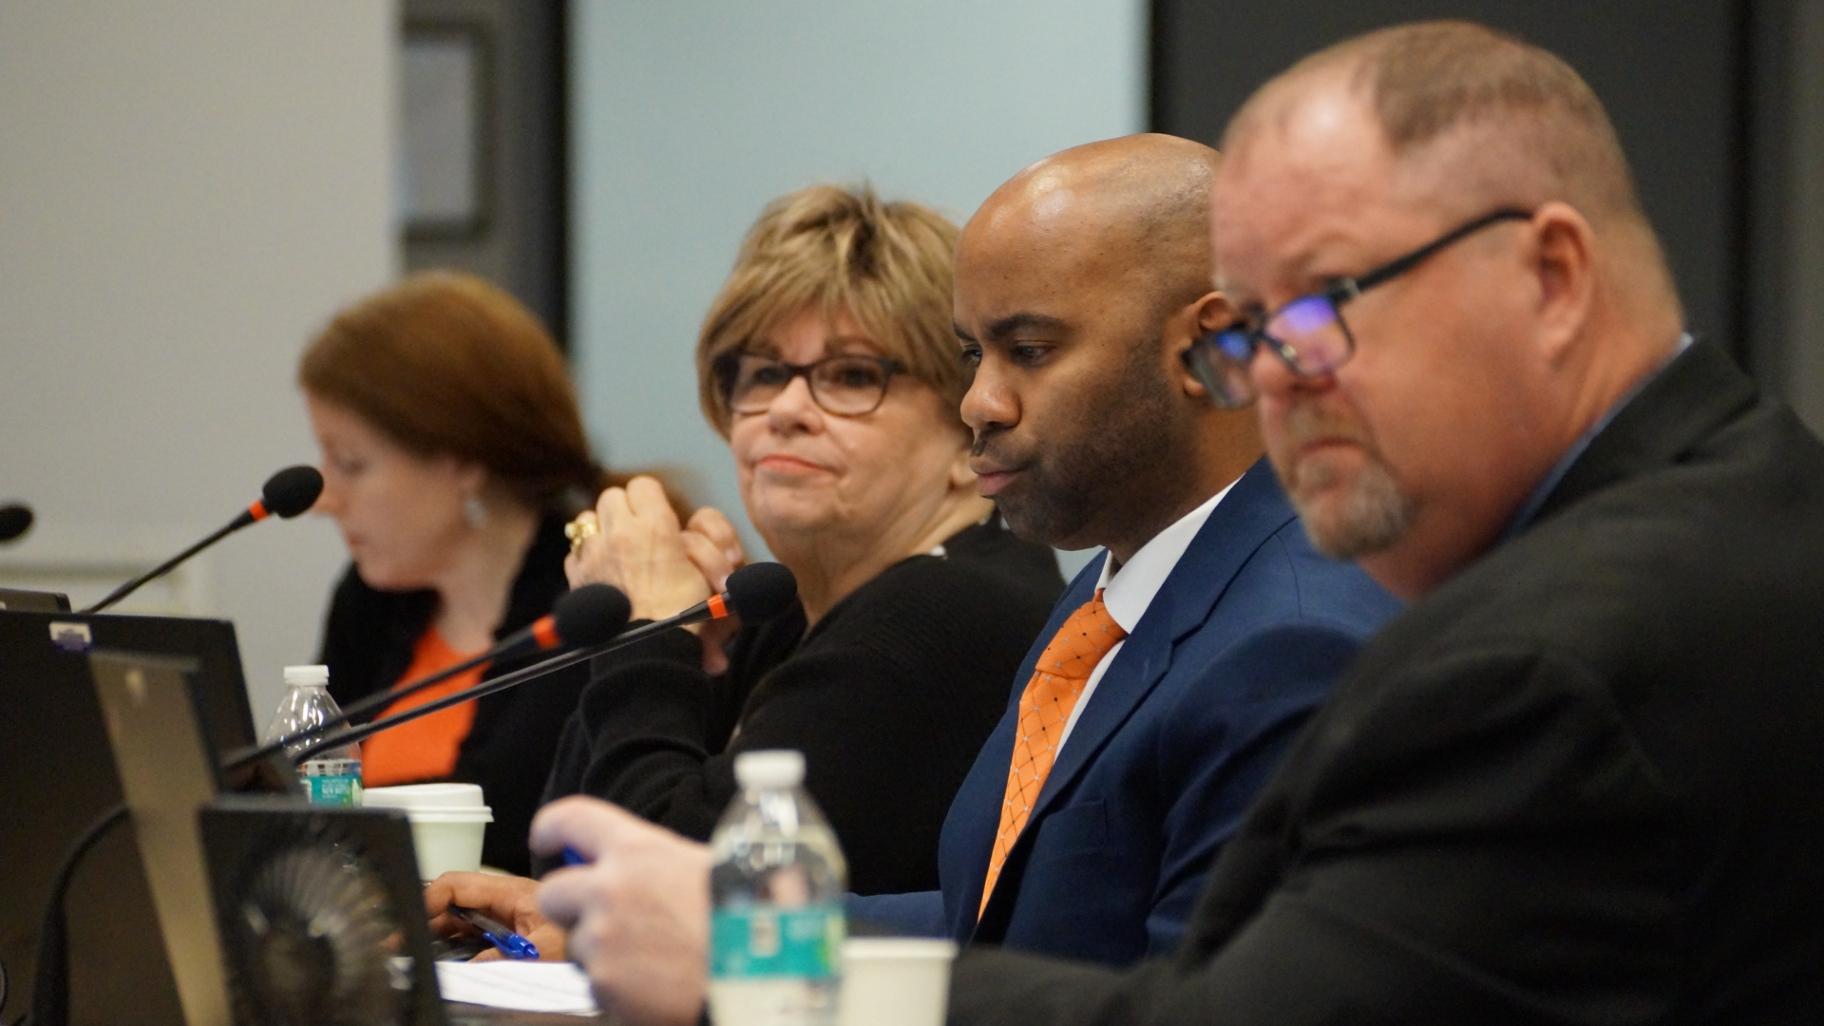 Prisoner Review Board members (left to right) Julie Globokar, Darryldean Goff, Matthew Coates and Jeffrey Grubbs are pictured at the board’s March 28, 2024, meeting in Springfield. (Peter Hancock / Capitol News Illinois)